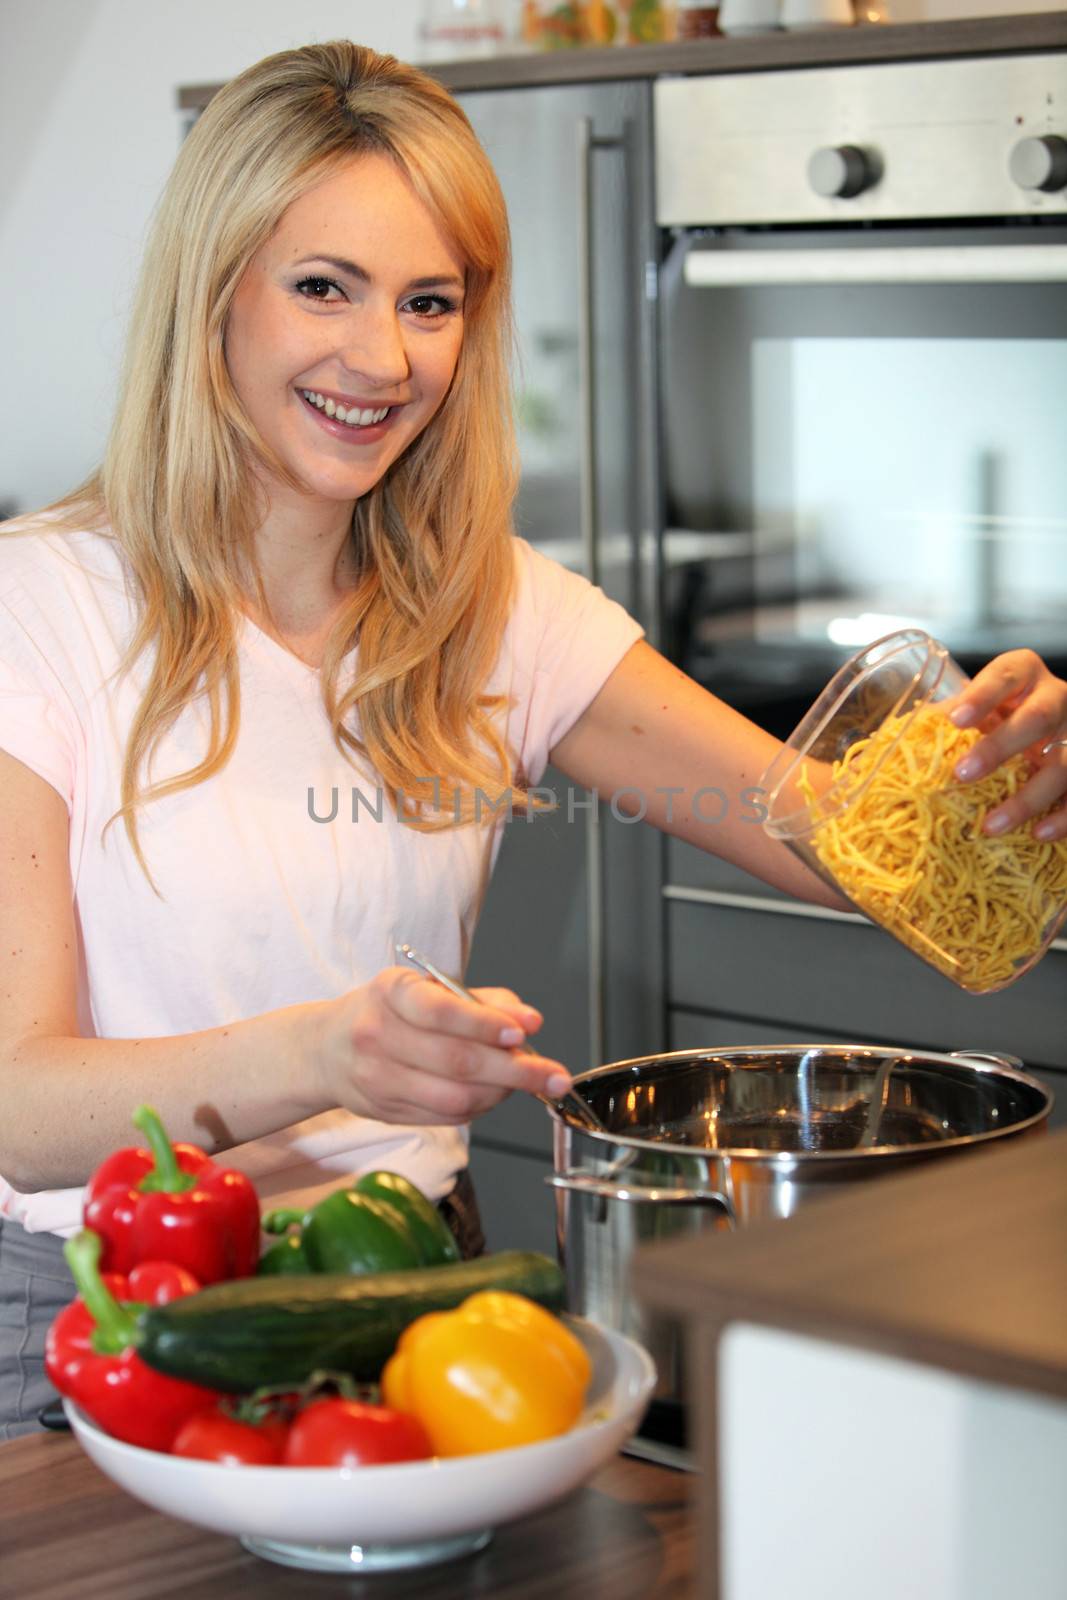 Smiling pretty young blond housewife preparing pasta in the kitchen tipping noodles into a saucepan of boiling water on the stove